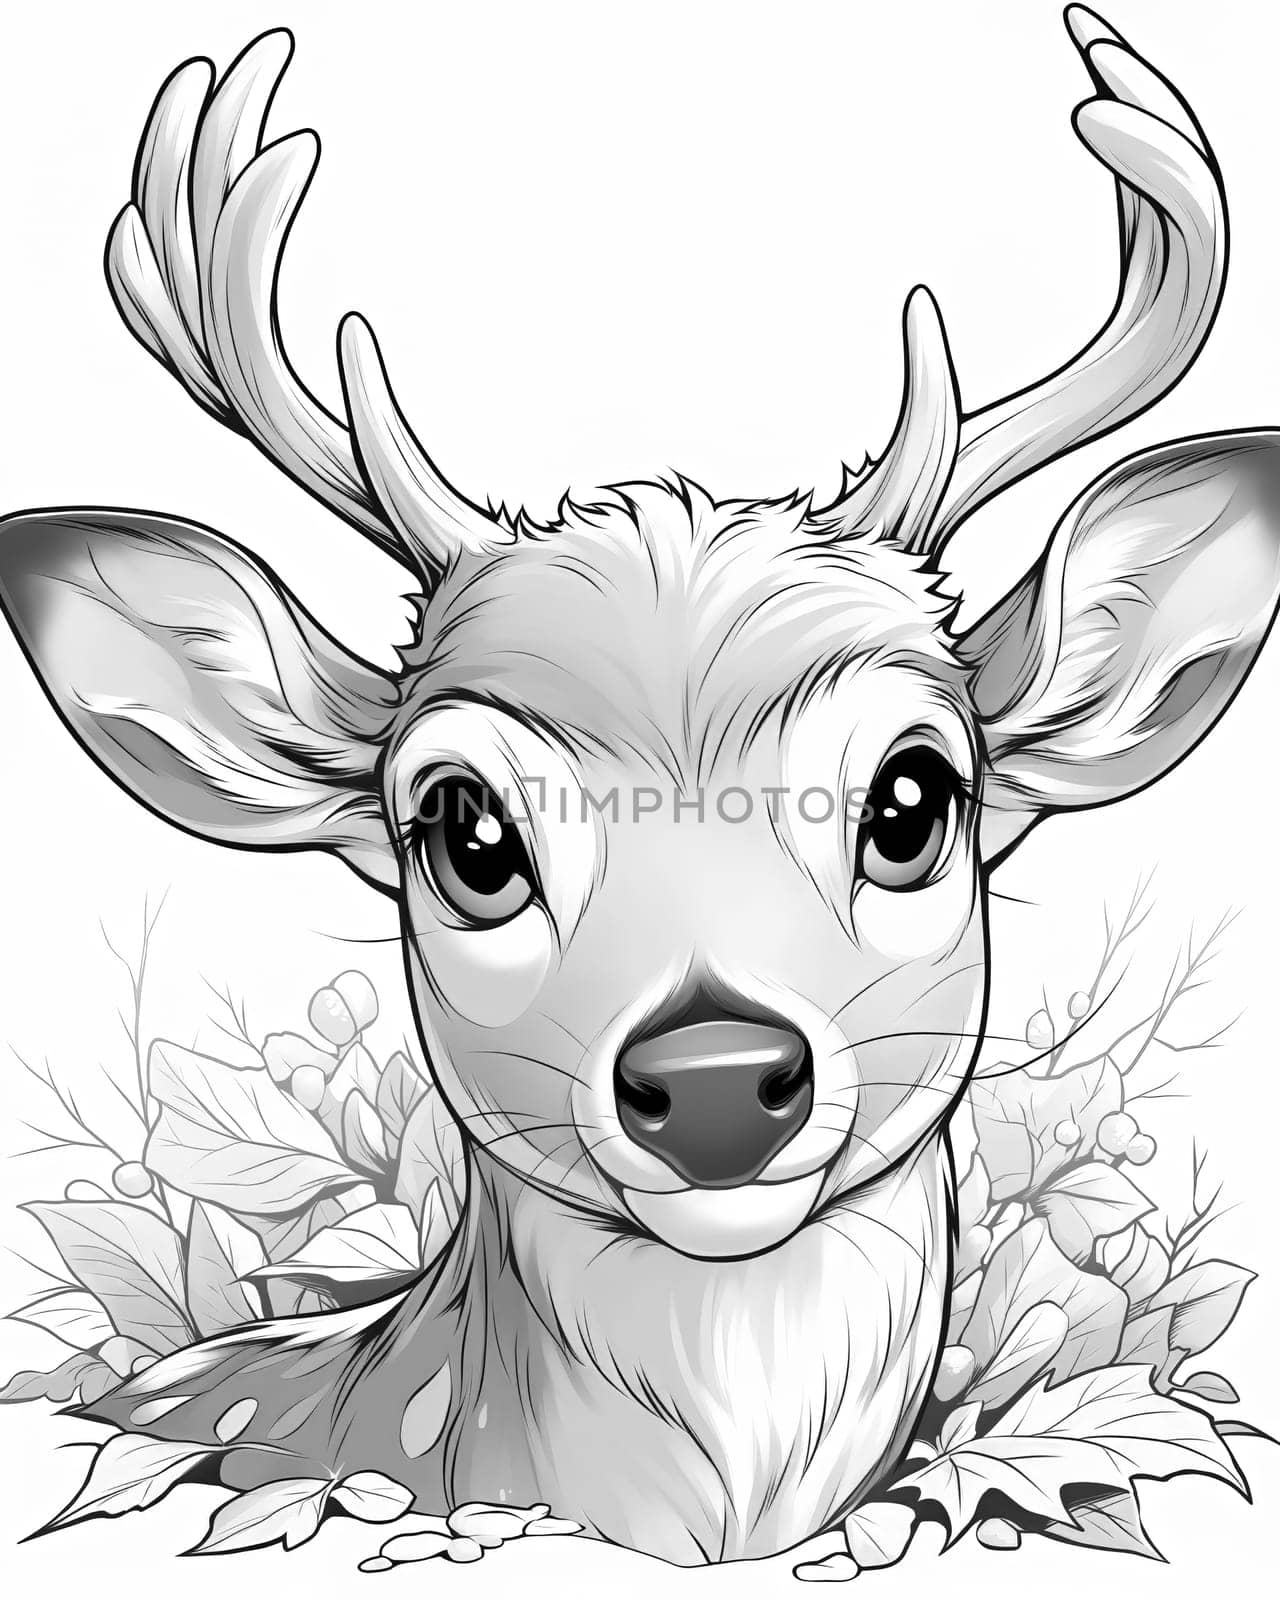 Coloring book for children, coloring animal, deer. Selective soft focus.